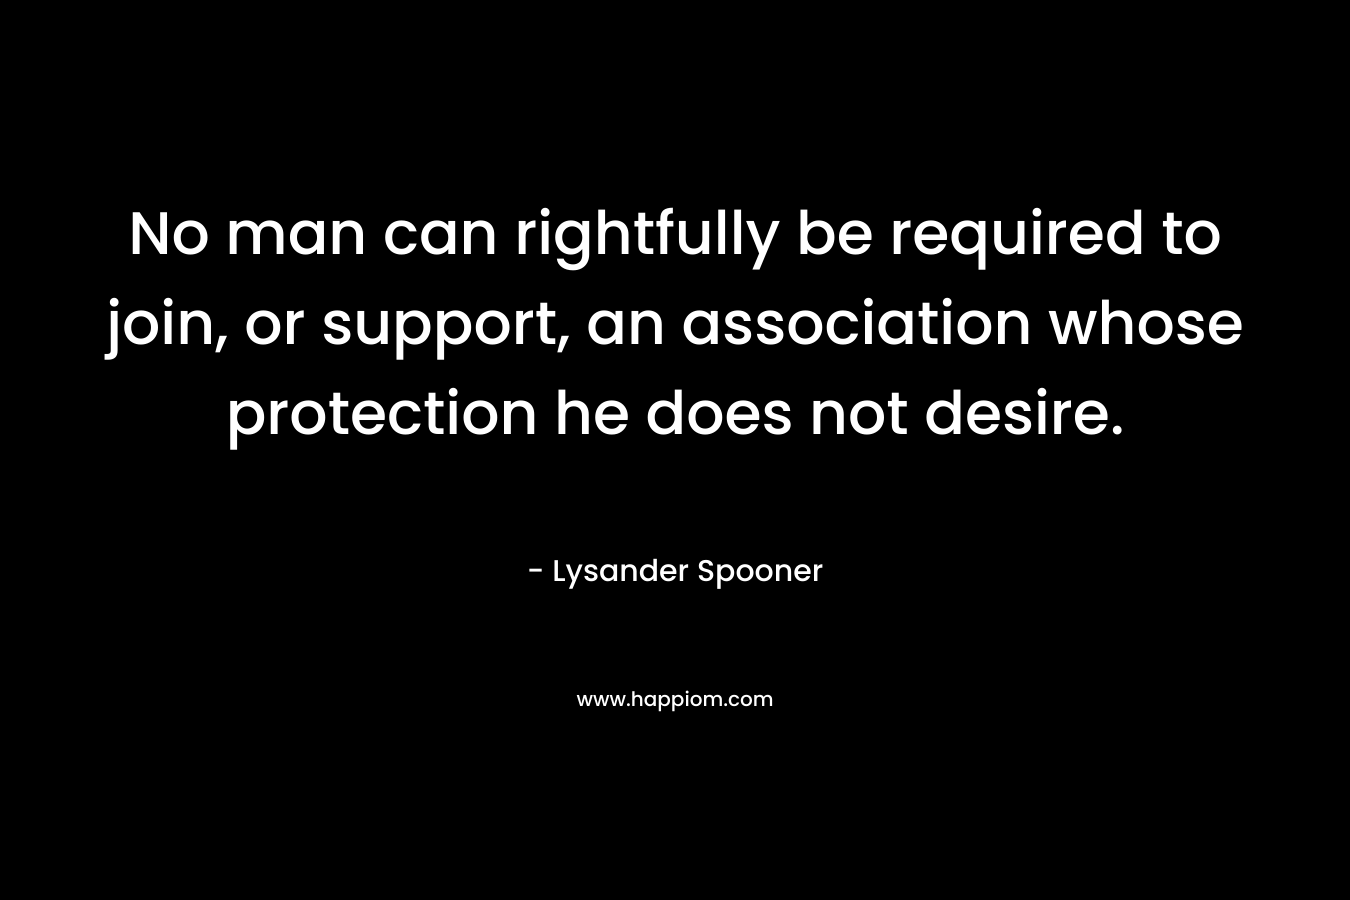 No man can rightfully be required to join, or support, an association whose protection he does not desire. – Lysander Spooner